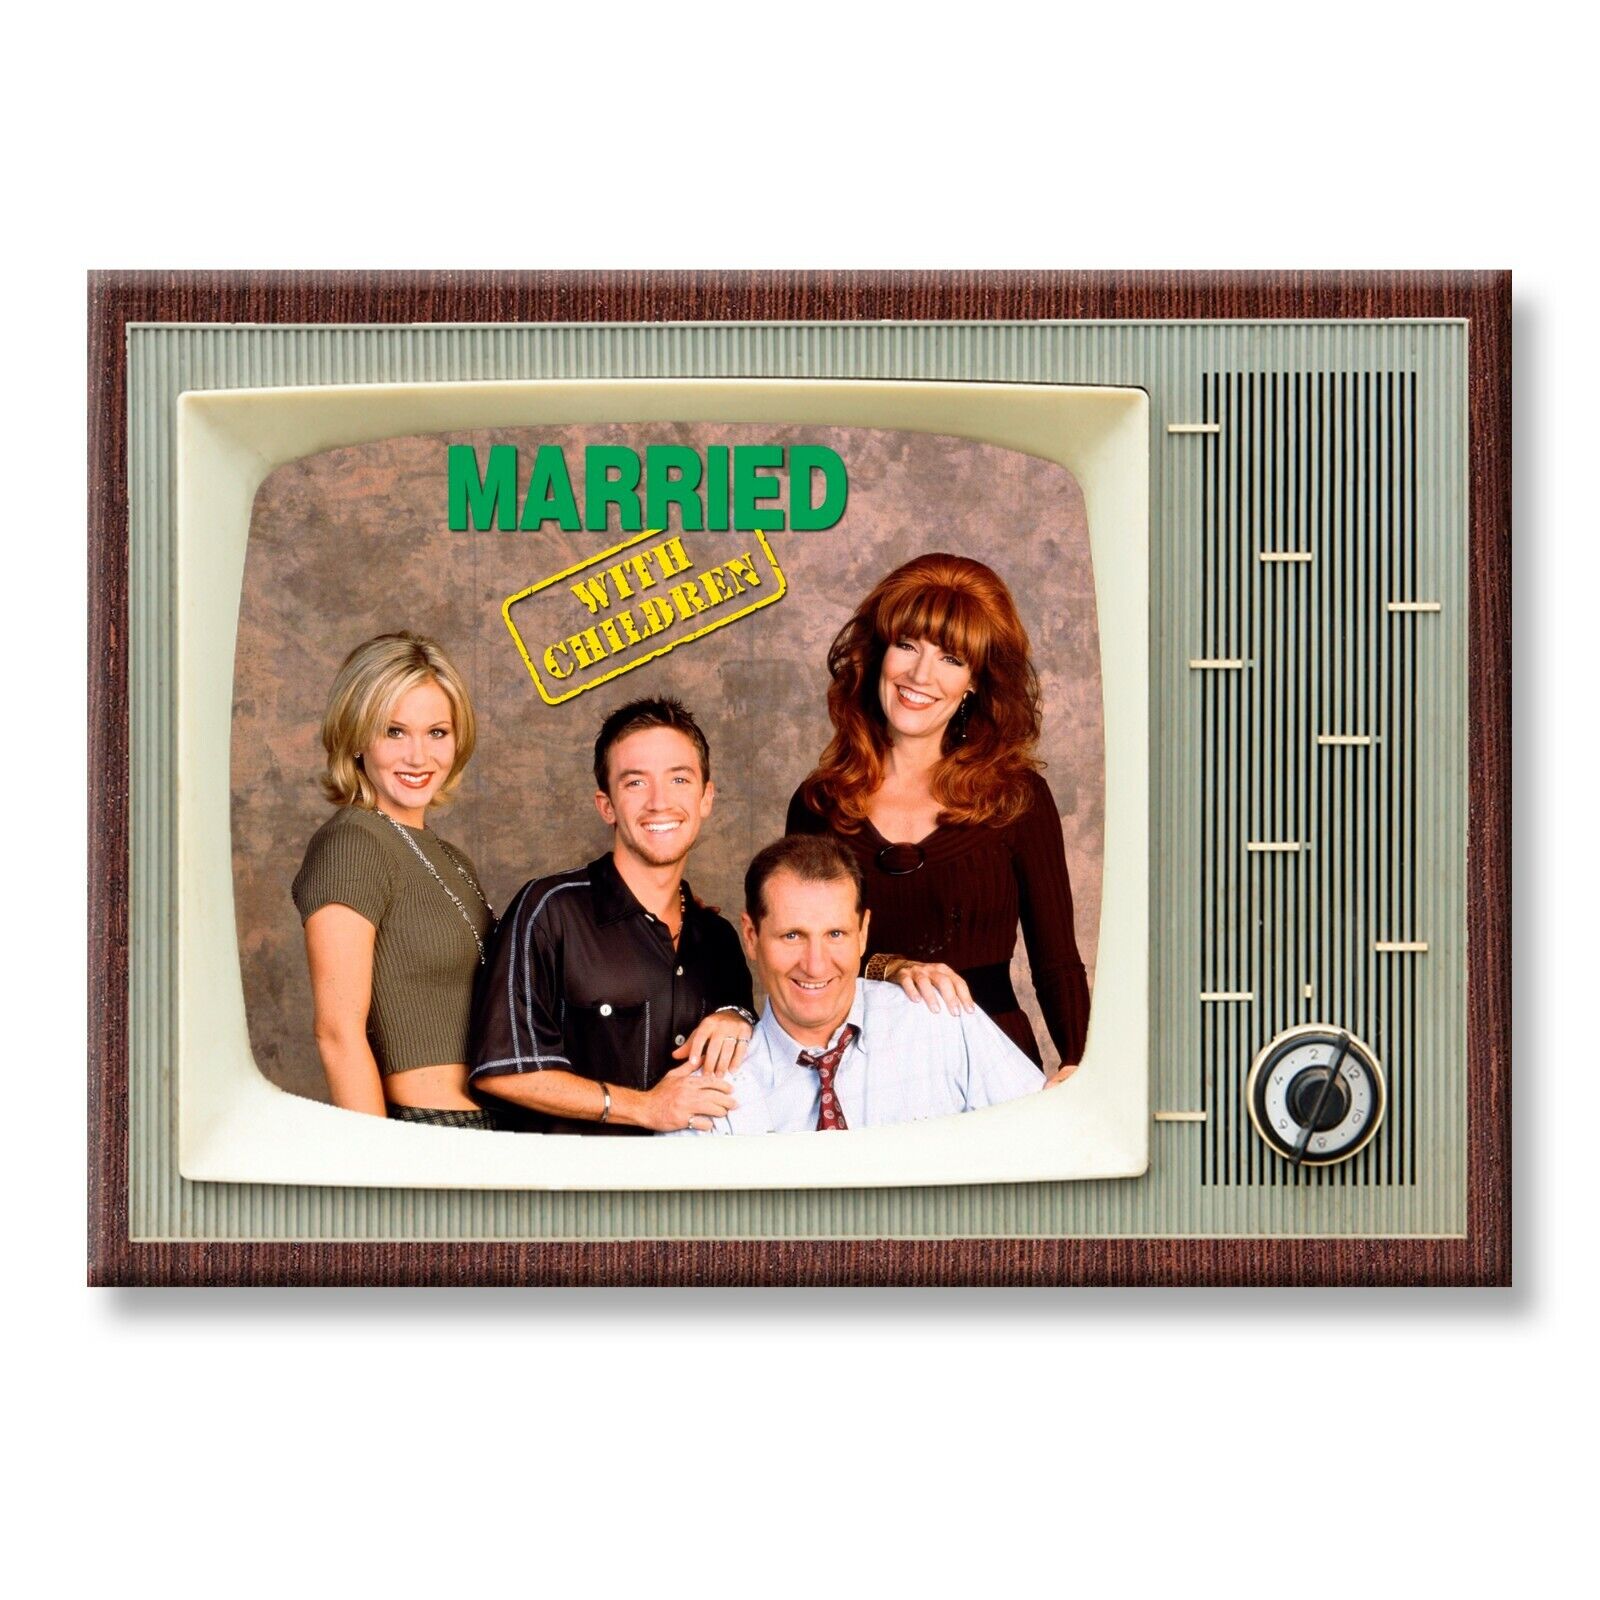 MARRIED WITH CHILDREN TV Show Classic TV 3.5 inches x 2.5 inches FRIDGE MAGNET